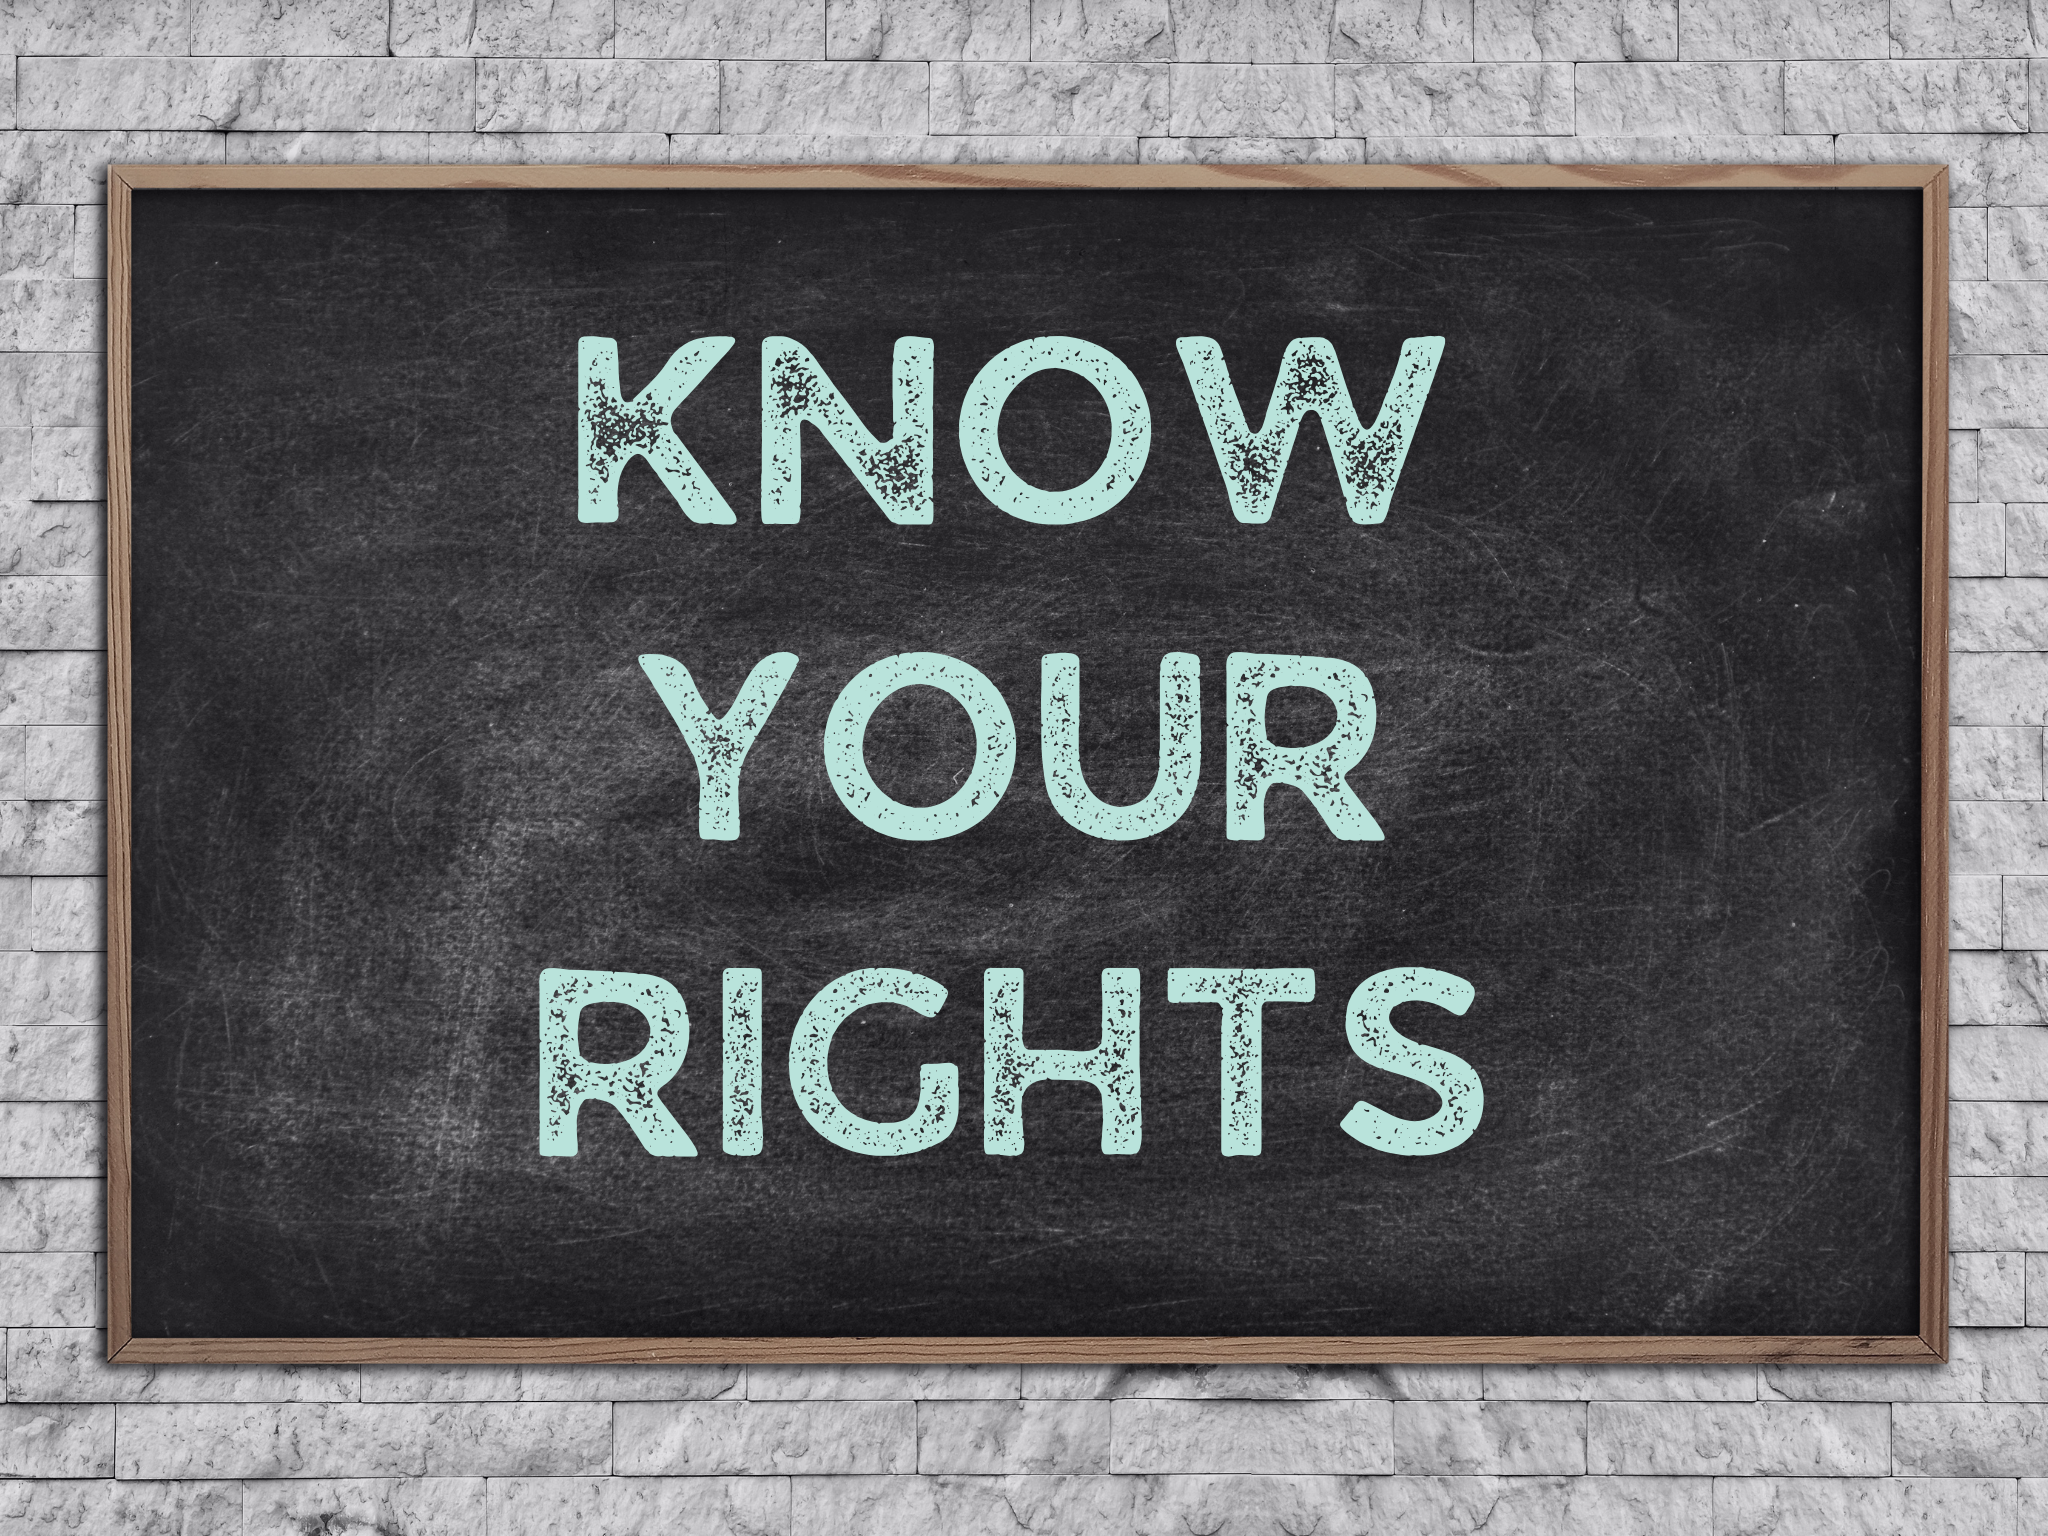 chalkboard with the words "know your rights" written on it